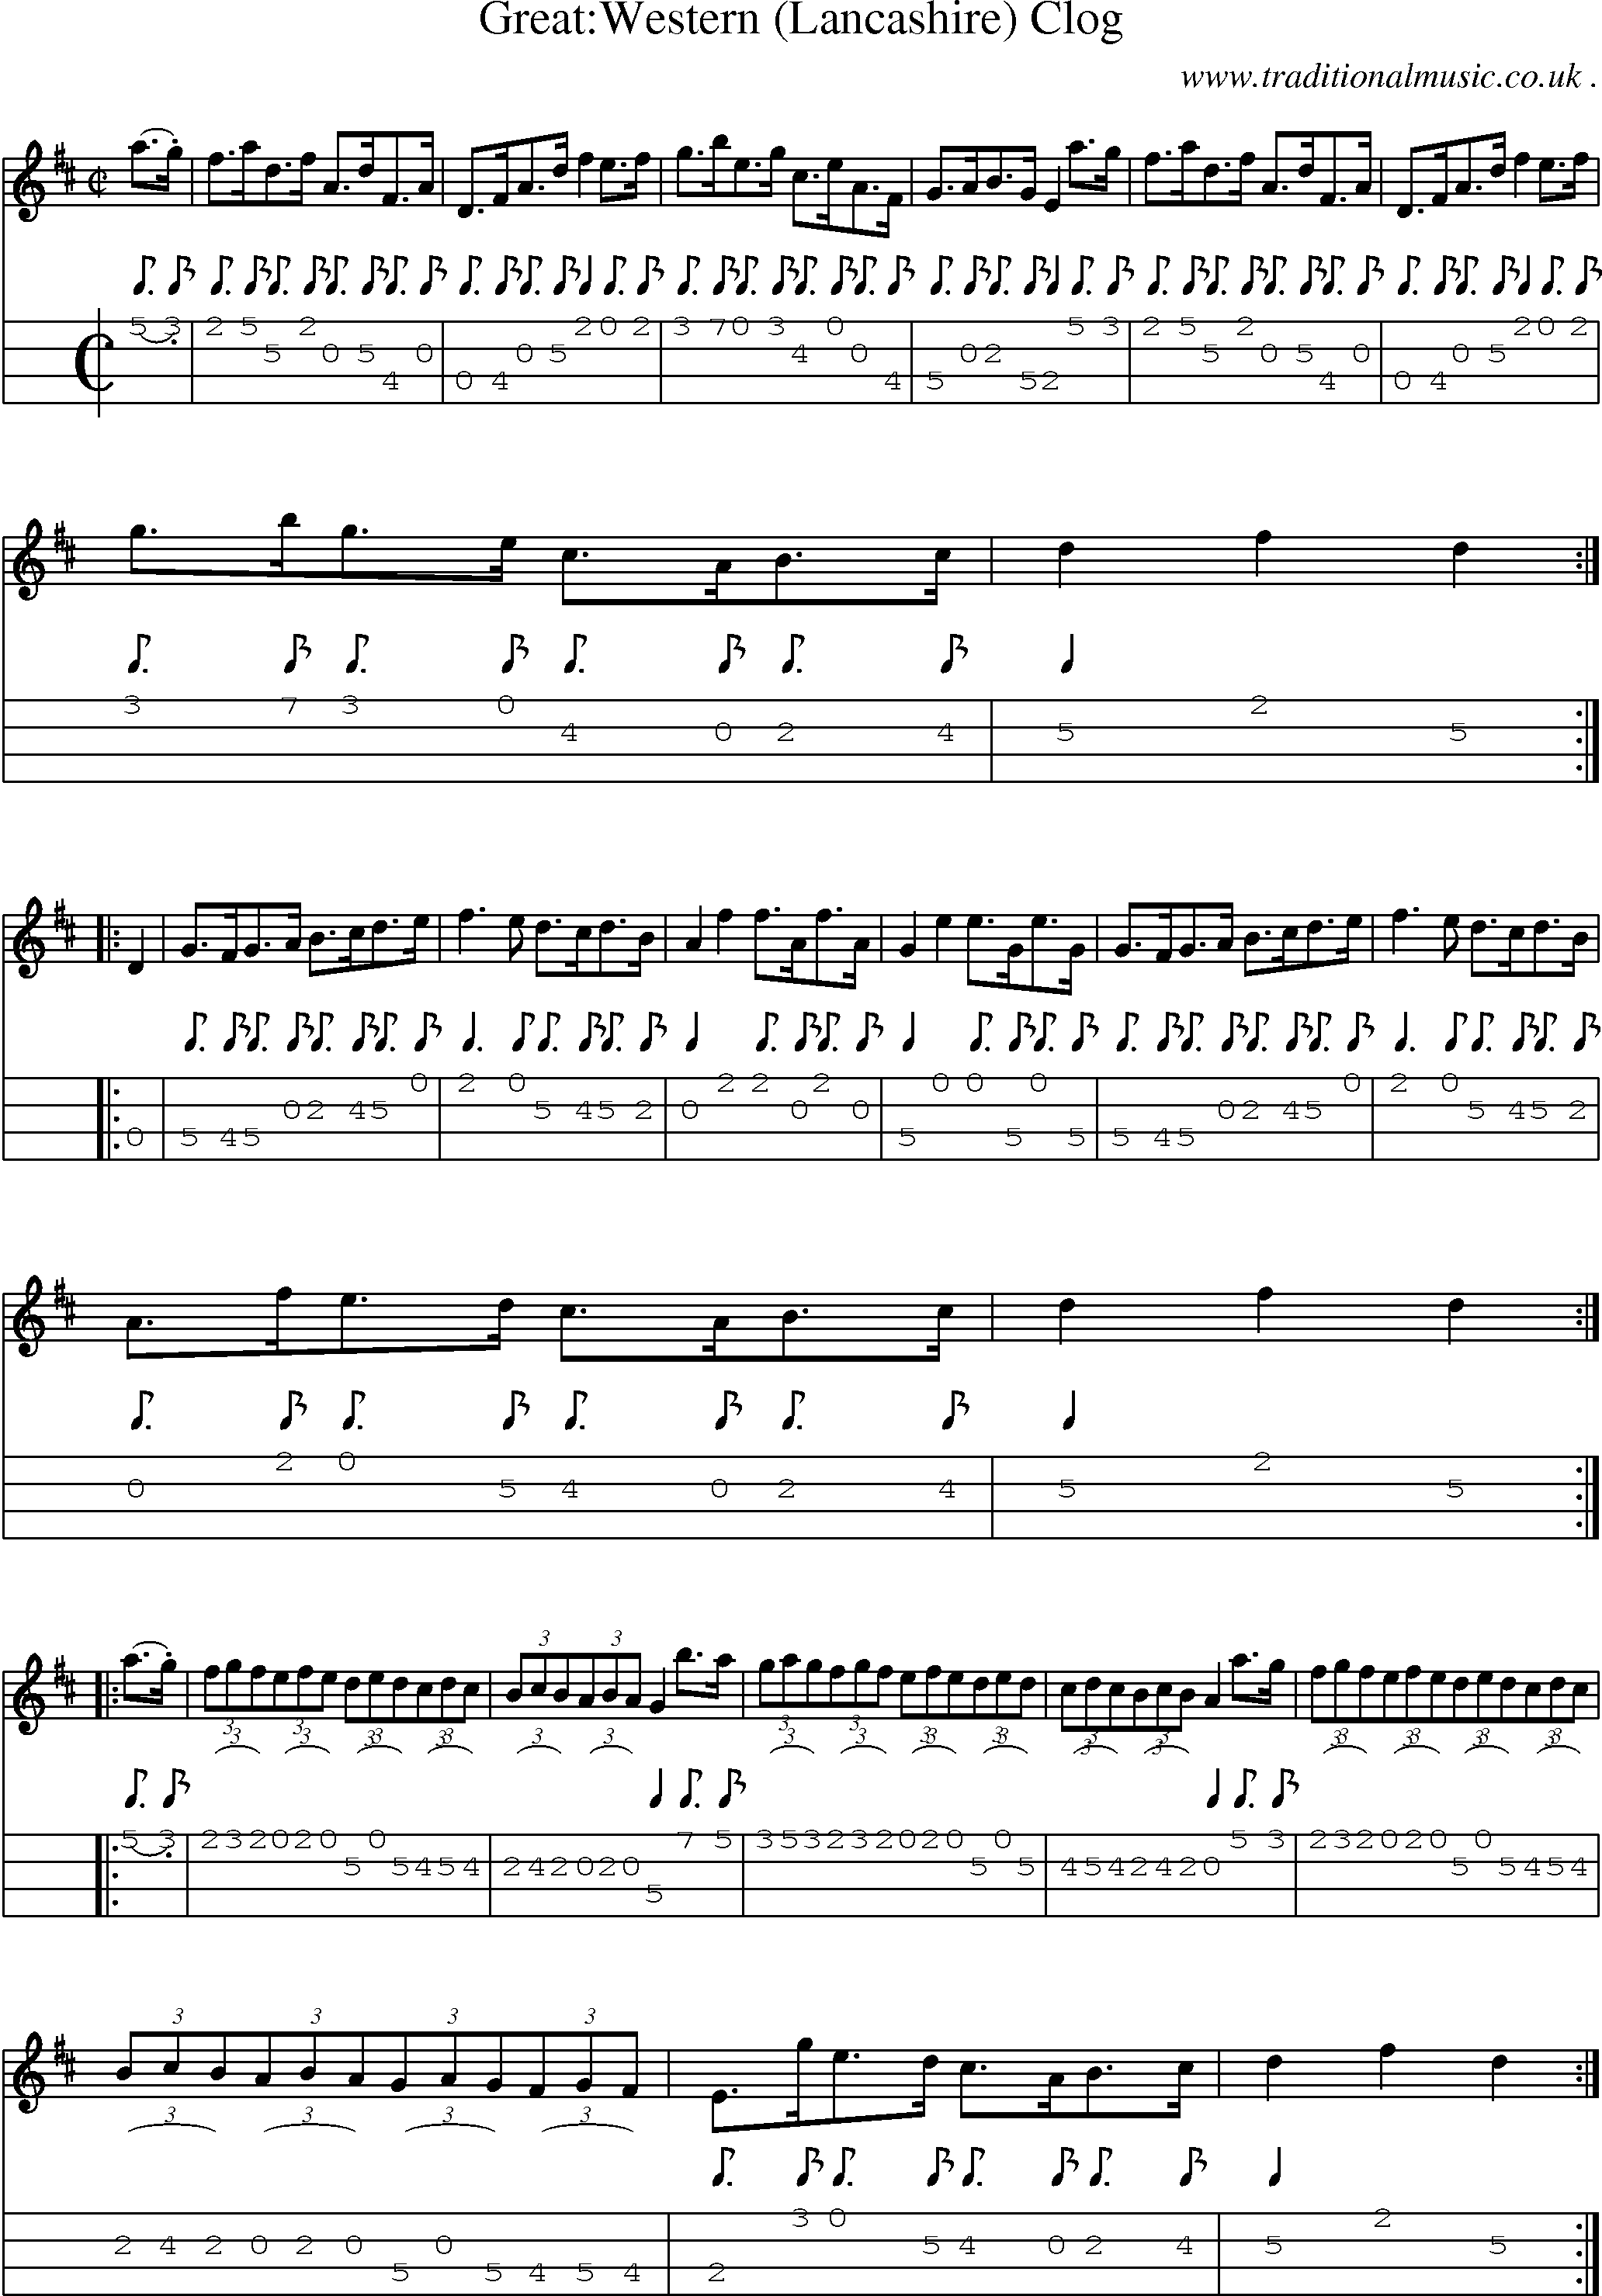 Sheet-Music and Mandolin Tabs for Greatwestern (lancashire) Clog